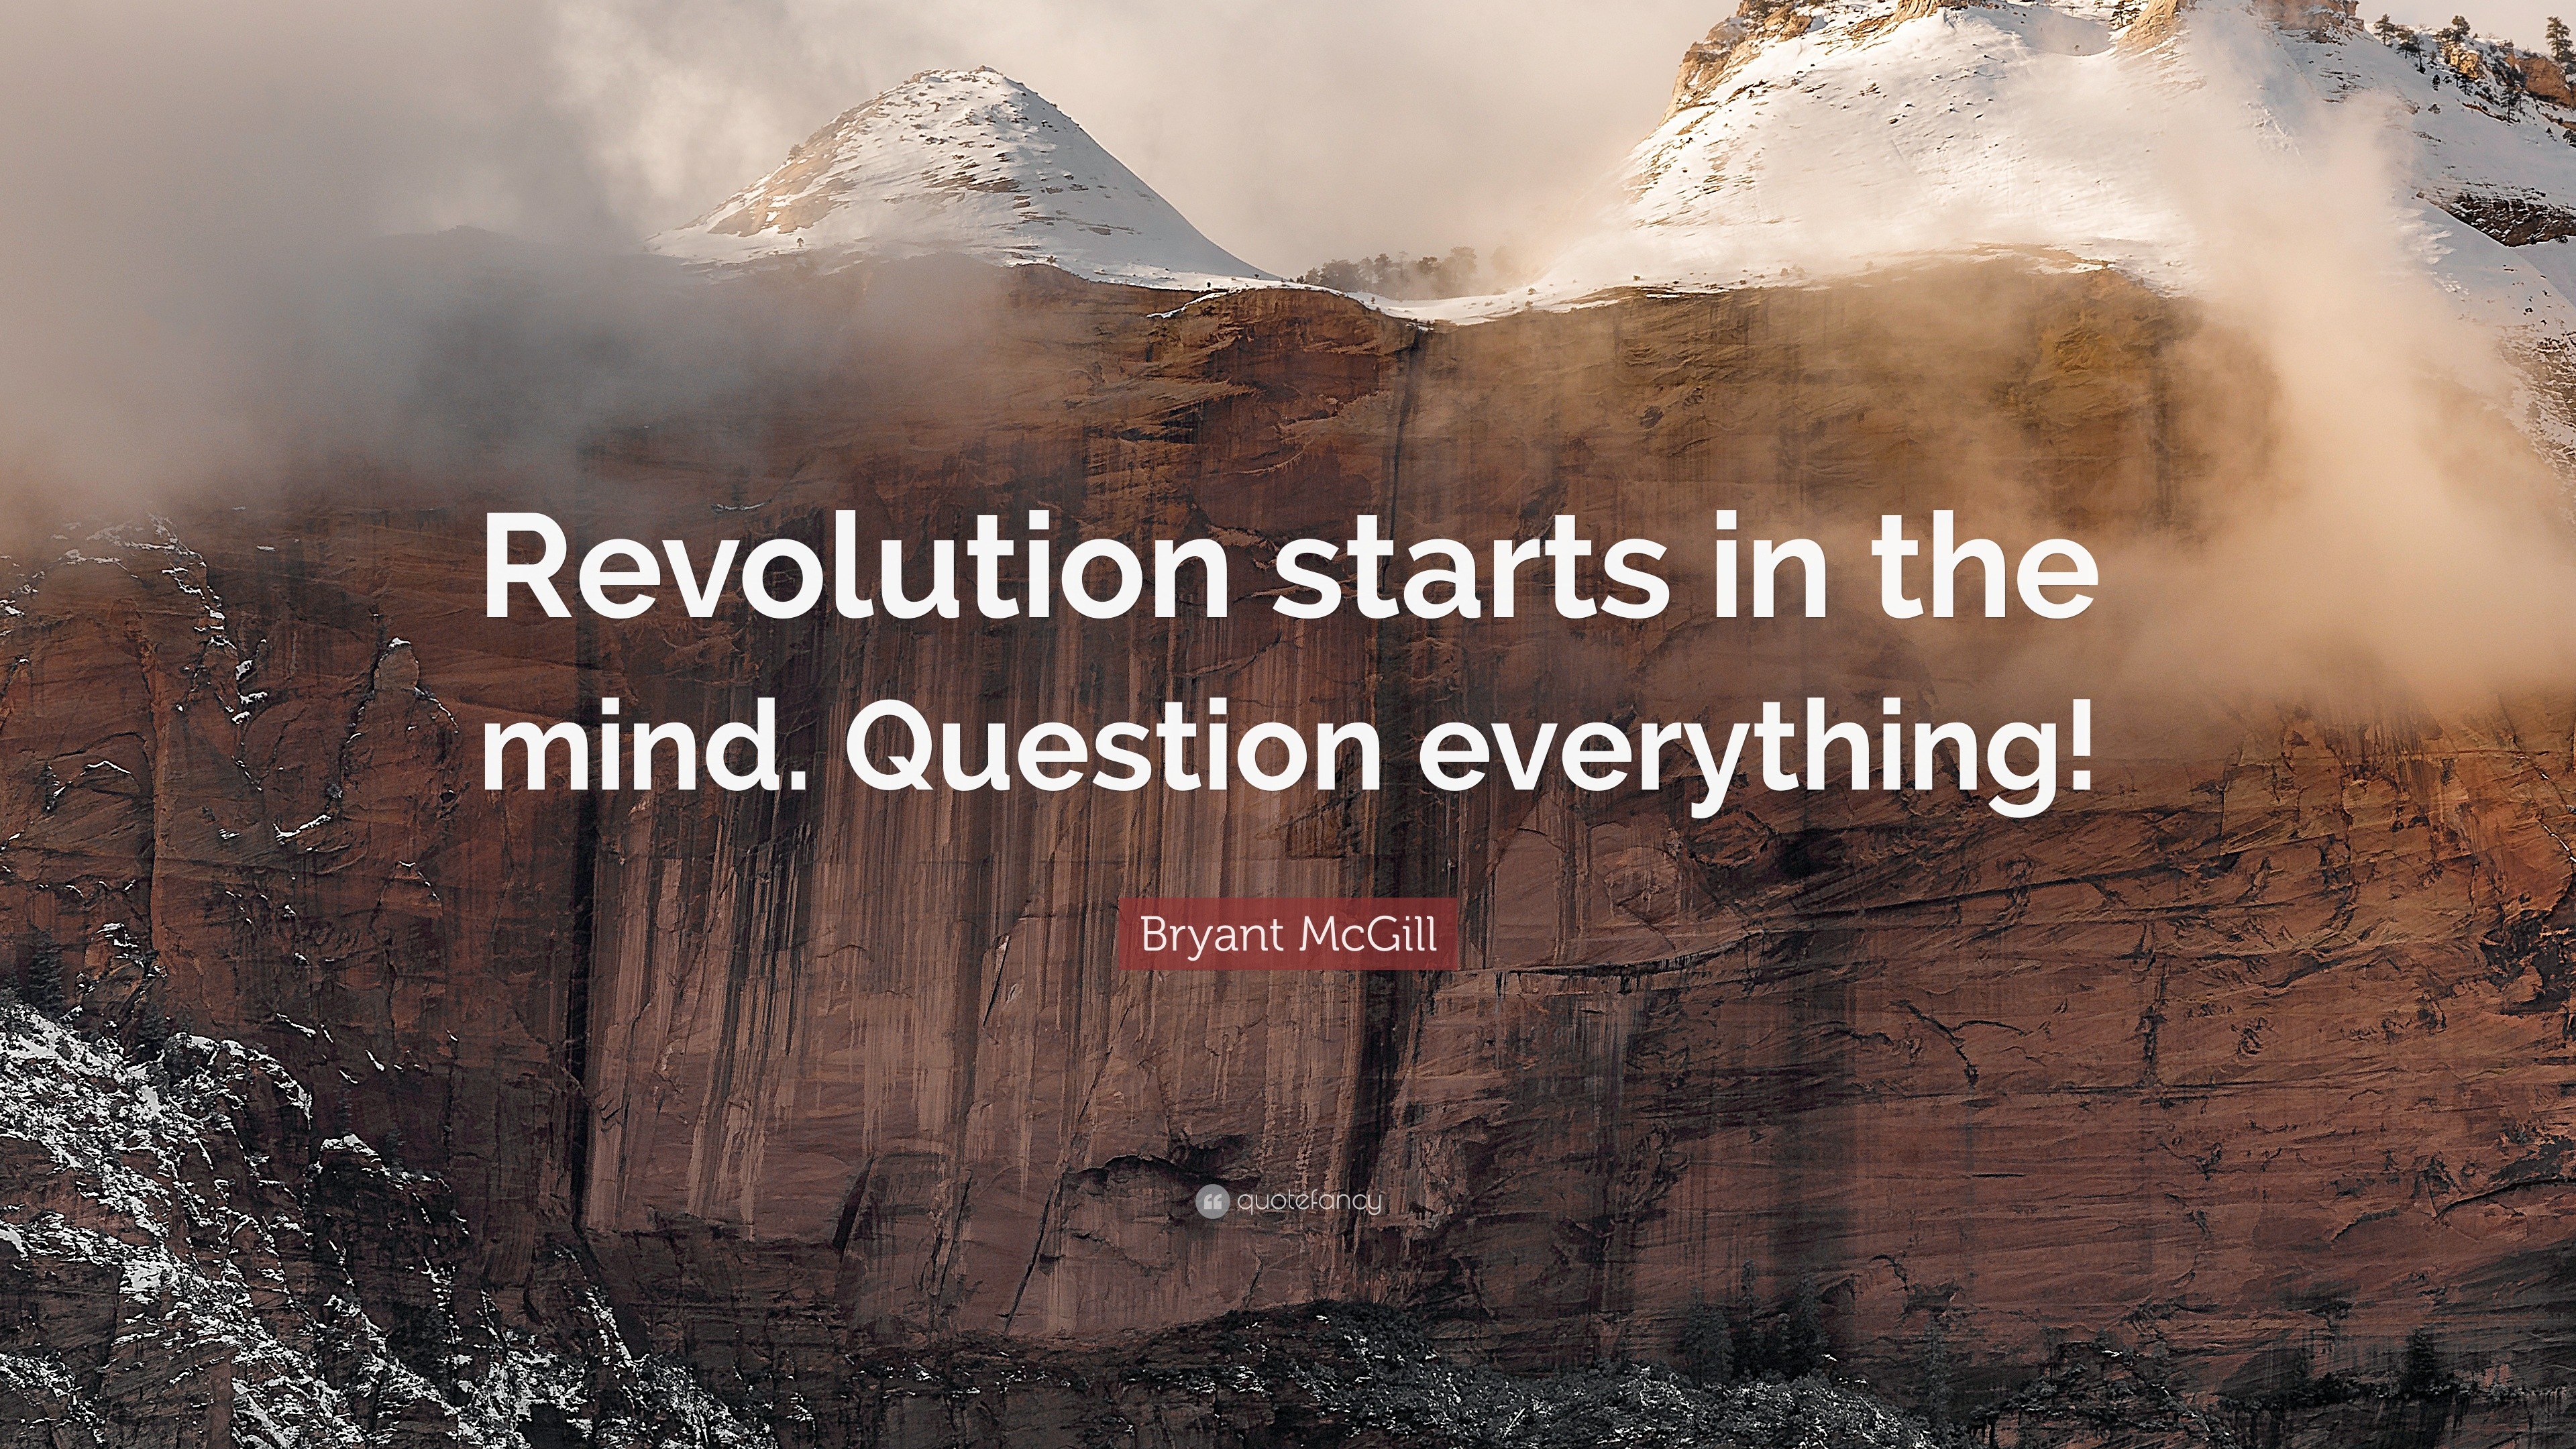 Bryant McGill Quote: "Revolution starts in the mind ...